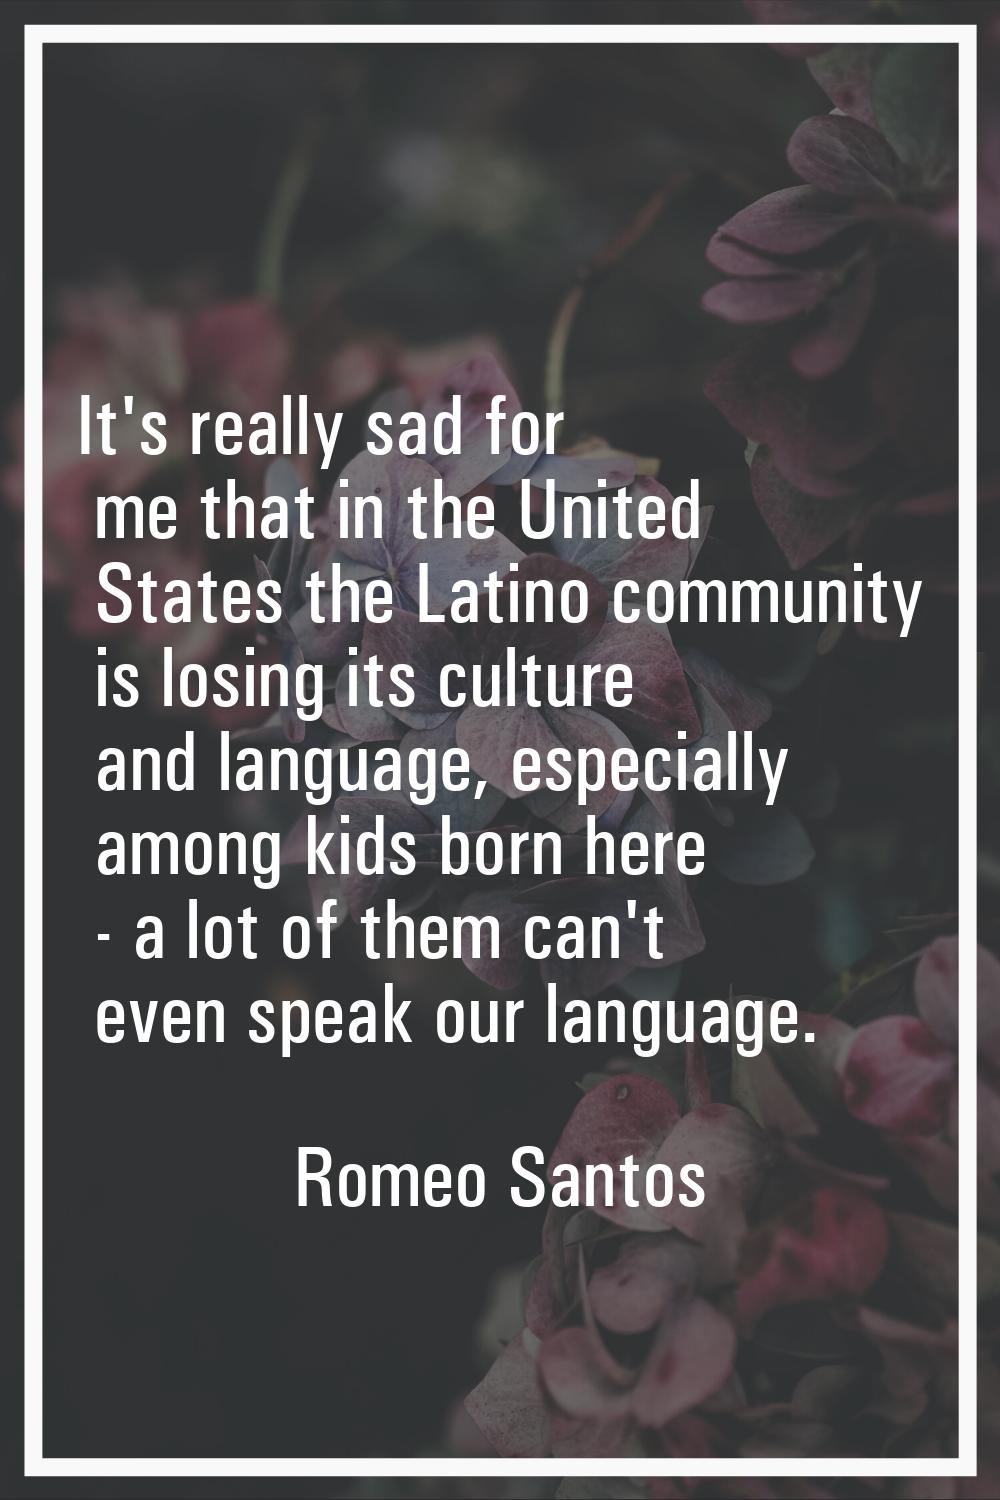 It's really sad for me that in the United States the Latino community is losing its culture and lan